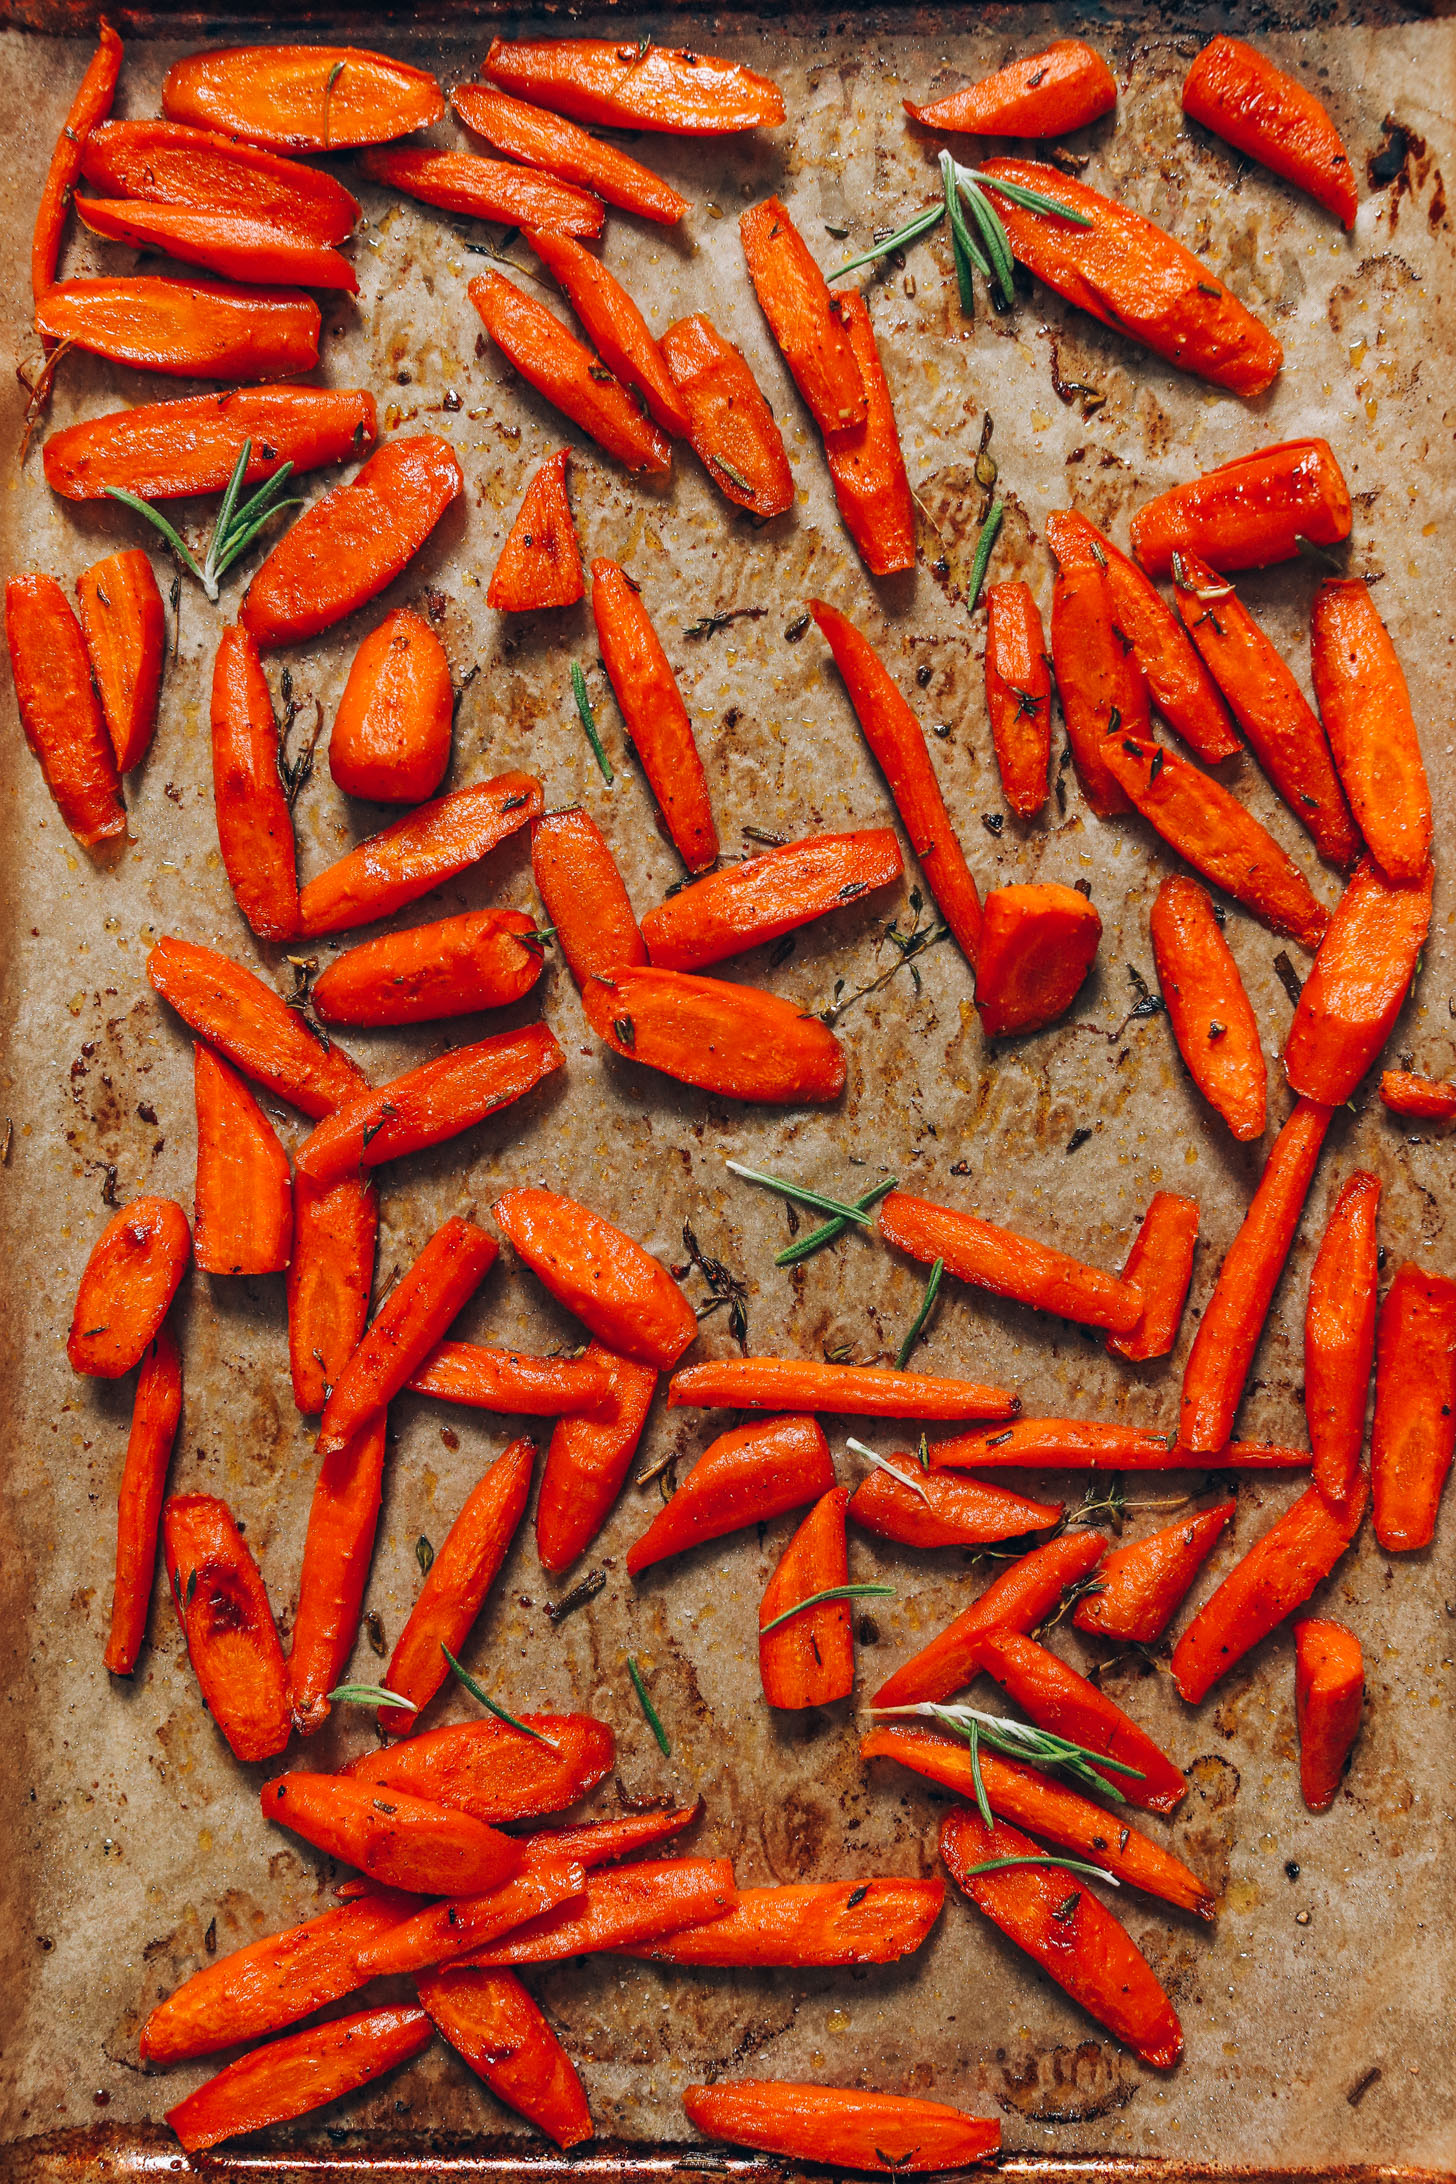 Baking sheet of roasted carrots with rosemary and thyme